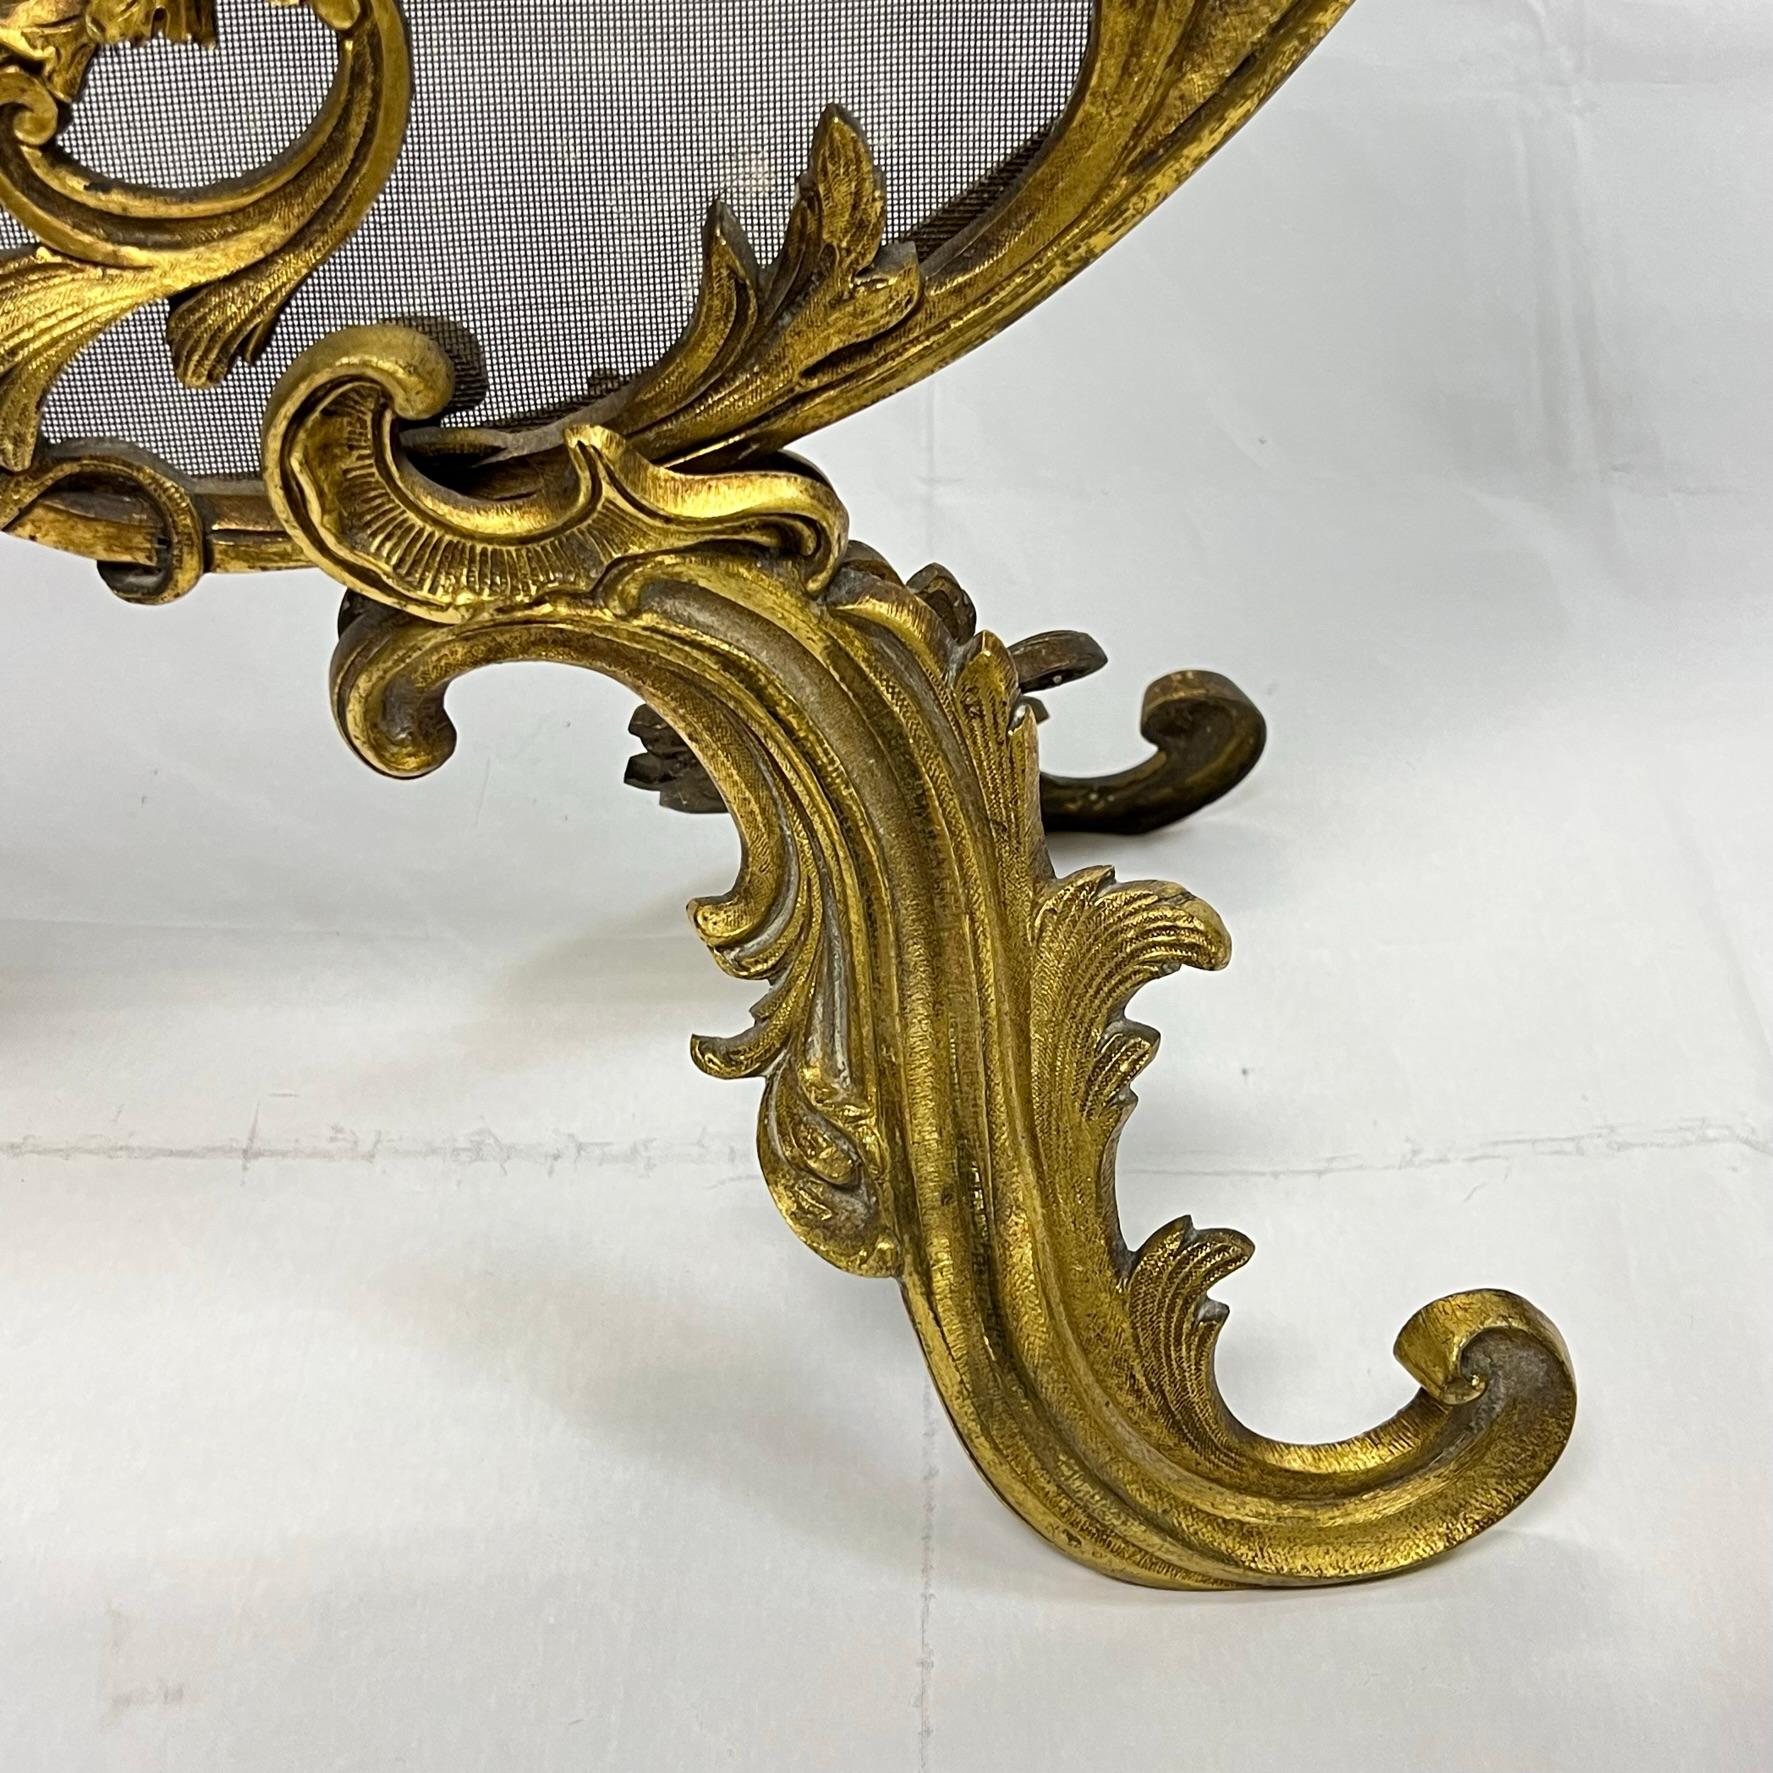 19th Century French Gilt Bronze Fireplace Screen in French Louis XV / XVI Style For Sale 2